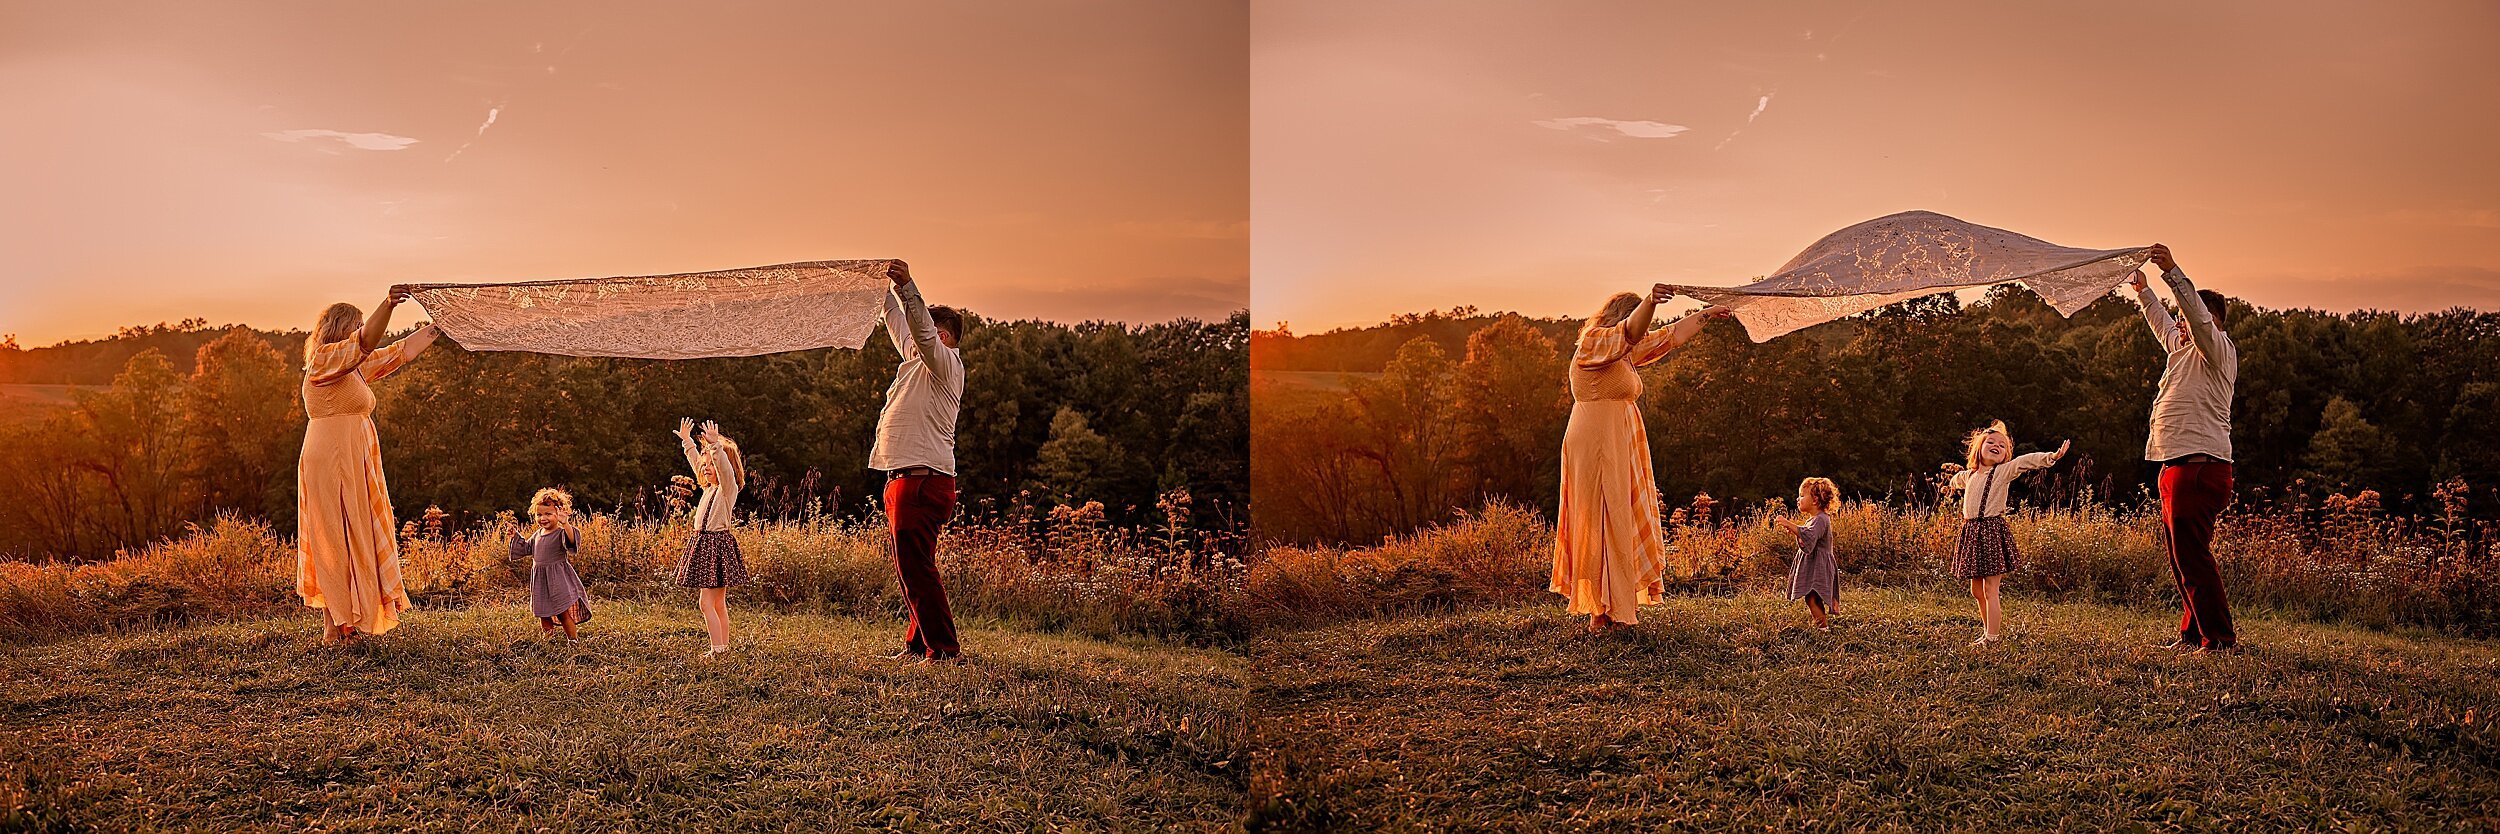 akron-ohio-family-photography-session-summer-sunset-outdoors-with-photographer-lauren-grayson_0301.jpeg